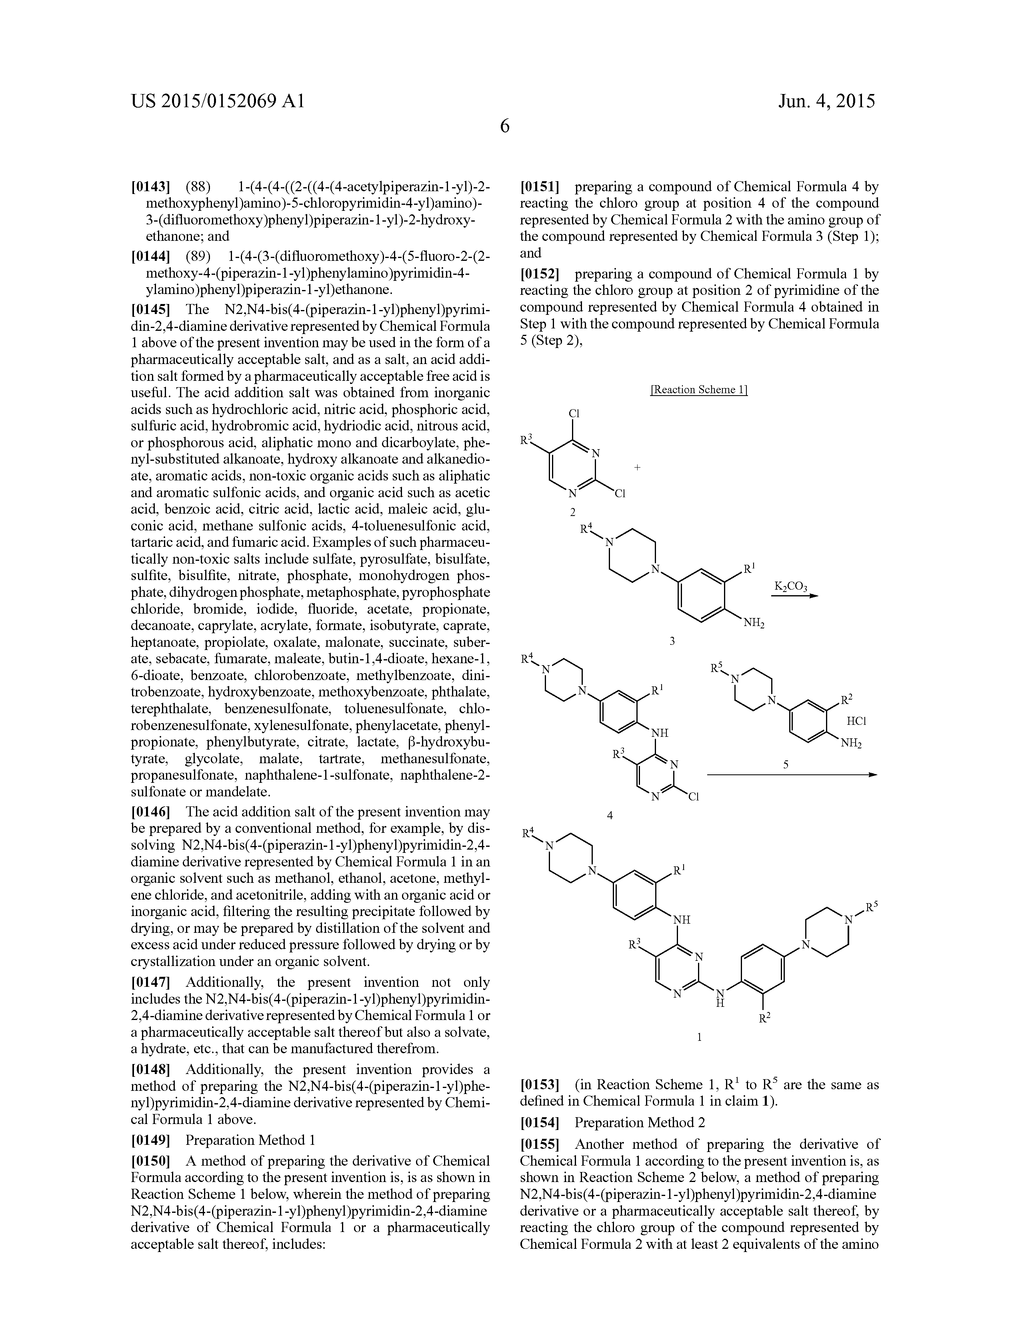 N2,N4-BIS(4-(PIPERAZINE-1-YL)PHENYL)PIRIMIDINE-2,4-DIAMINE DERIVATIVE OR     PHARMACEUTICALLY ACCEPTABLE SALT THEREOF, AND COMPOSITION CONTAINING SAME     AS ACTIVE INGREDIENT FOR PREVENTING OR TREATING CANCER - diagram, schematic, and image 10